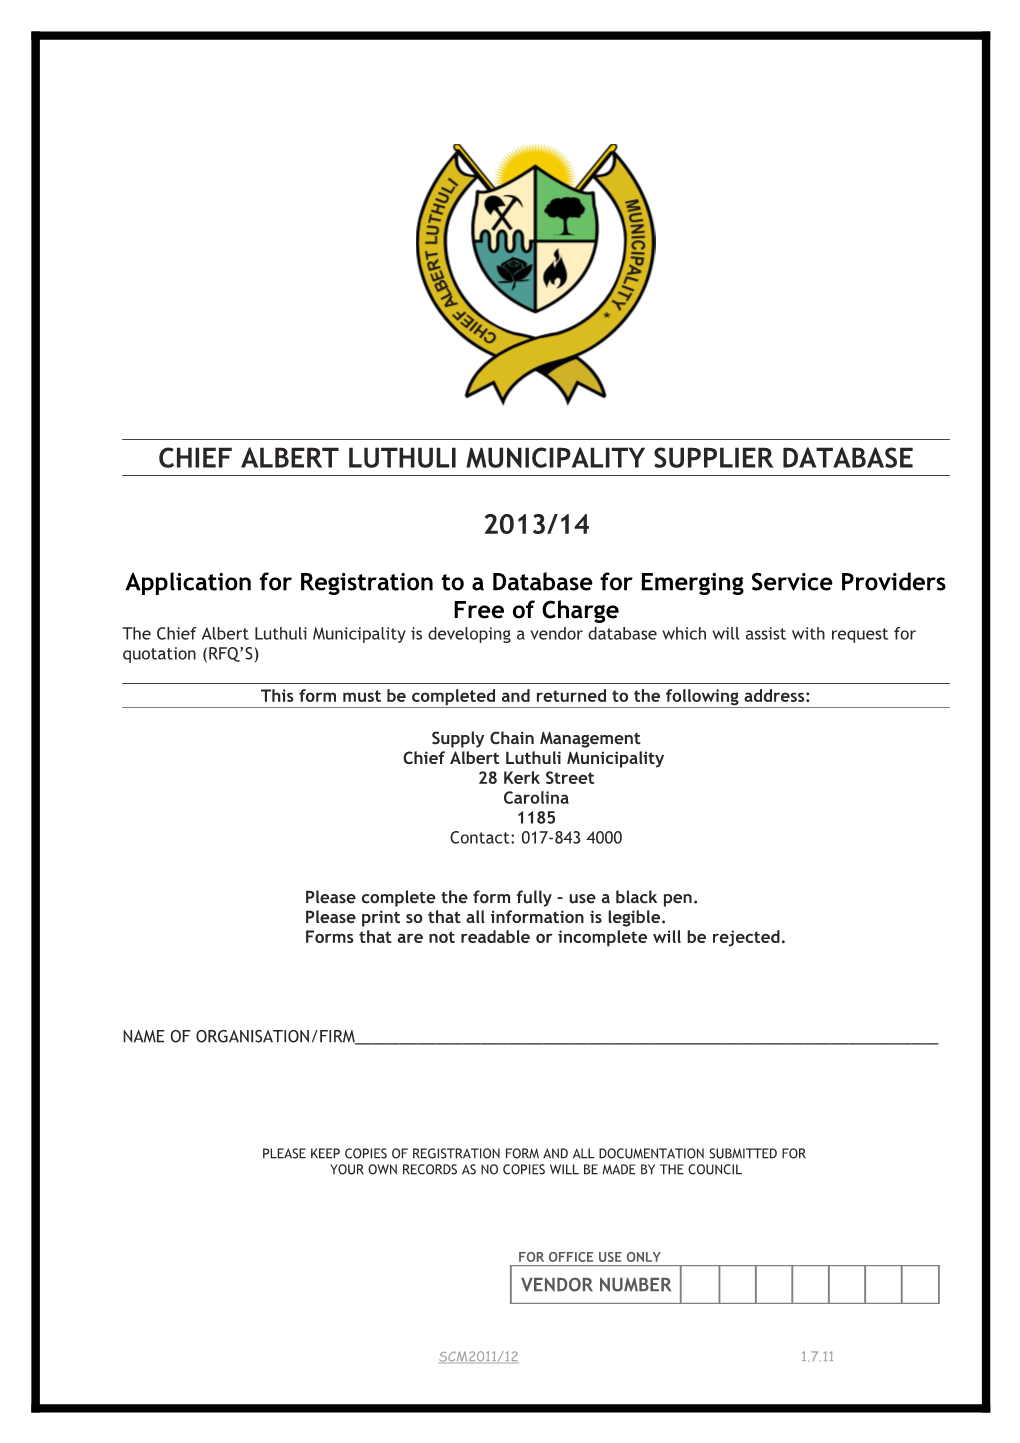 Chief Albertluthulimunicipality Supplier Database